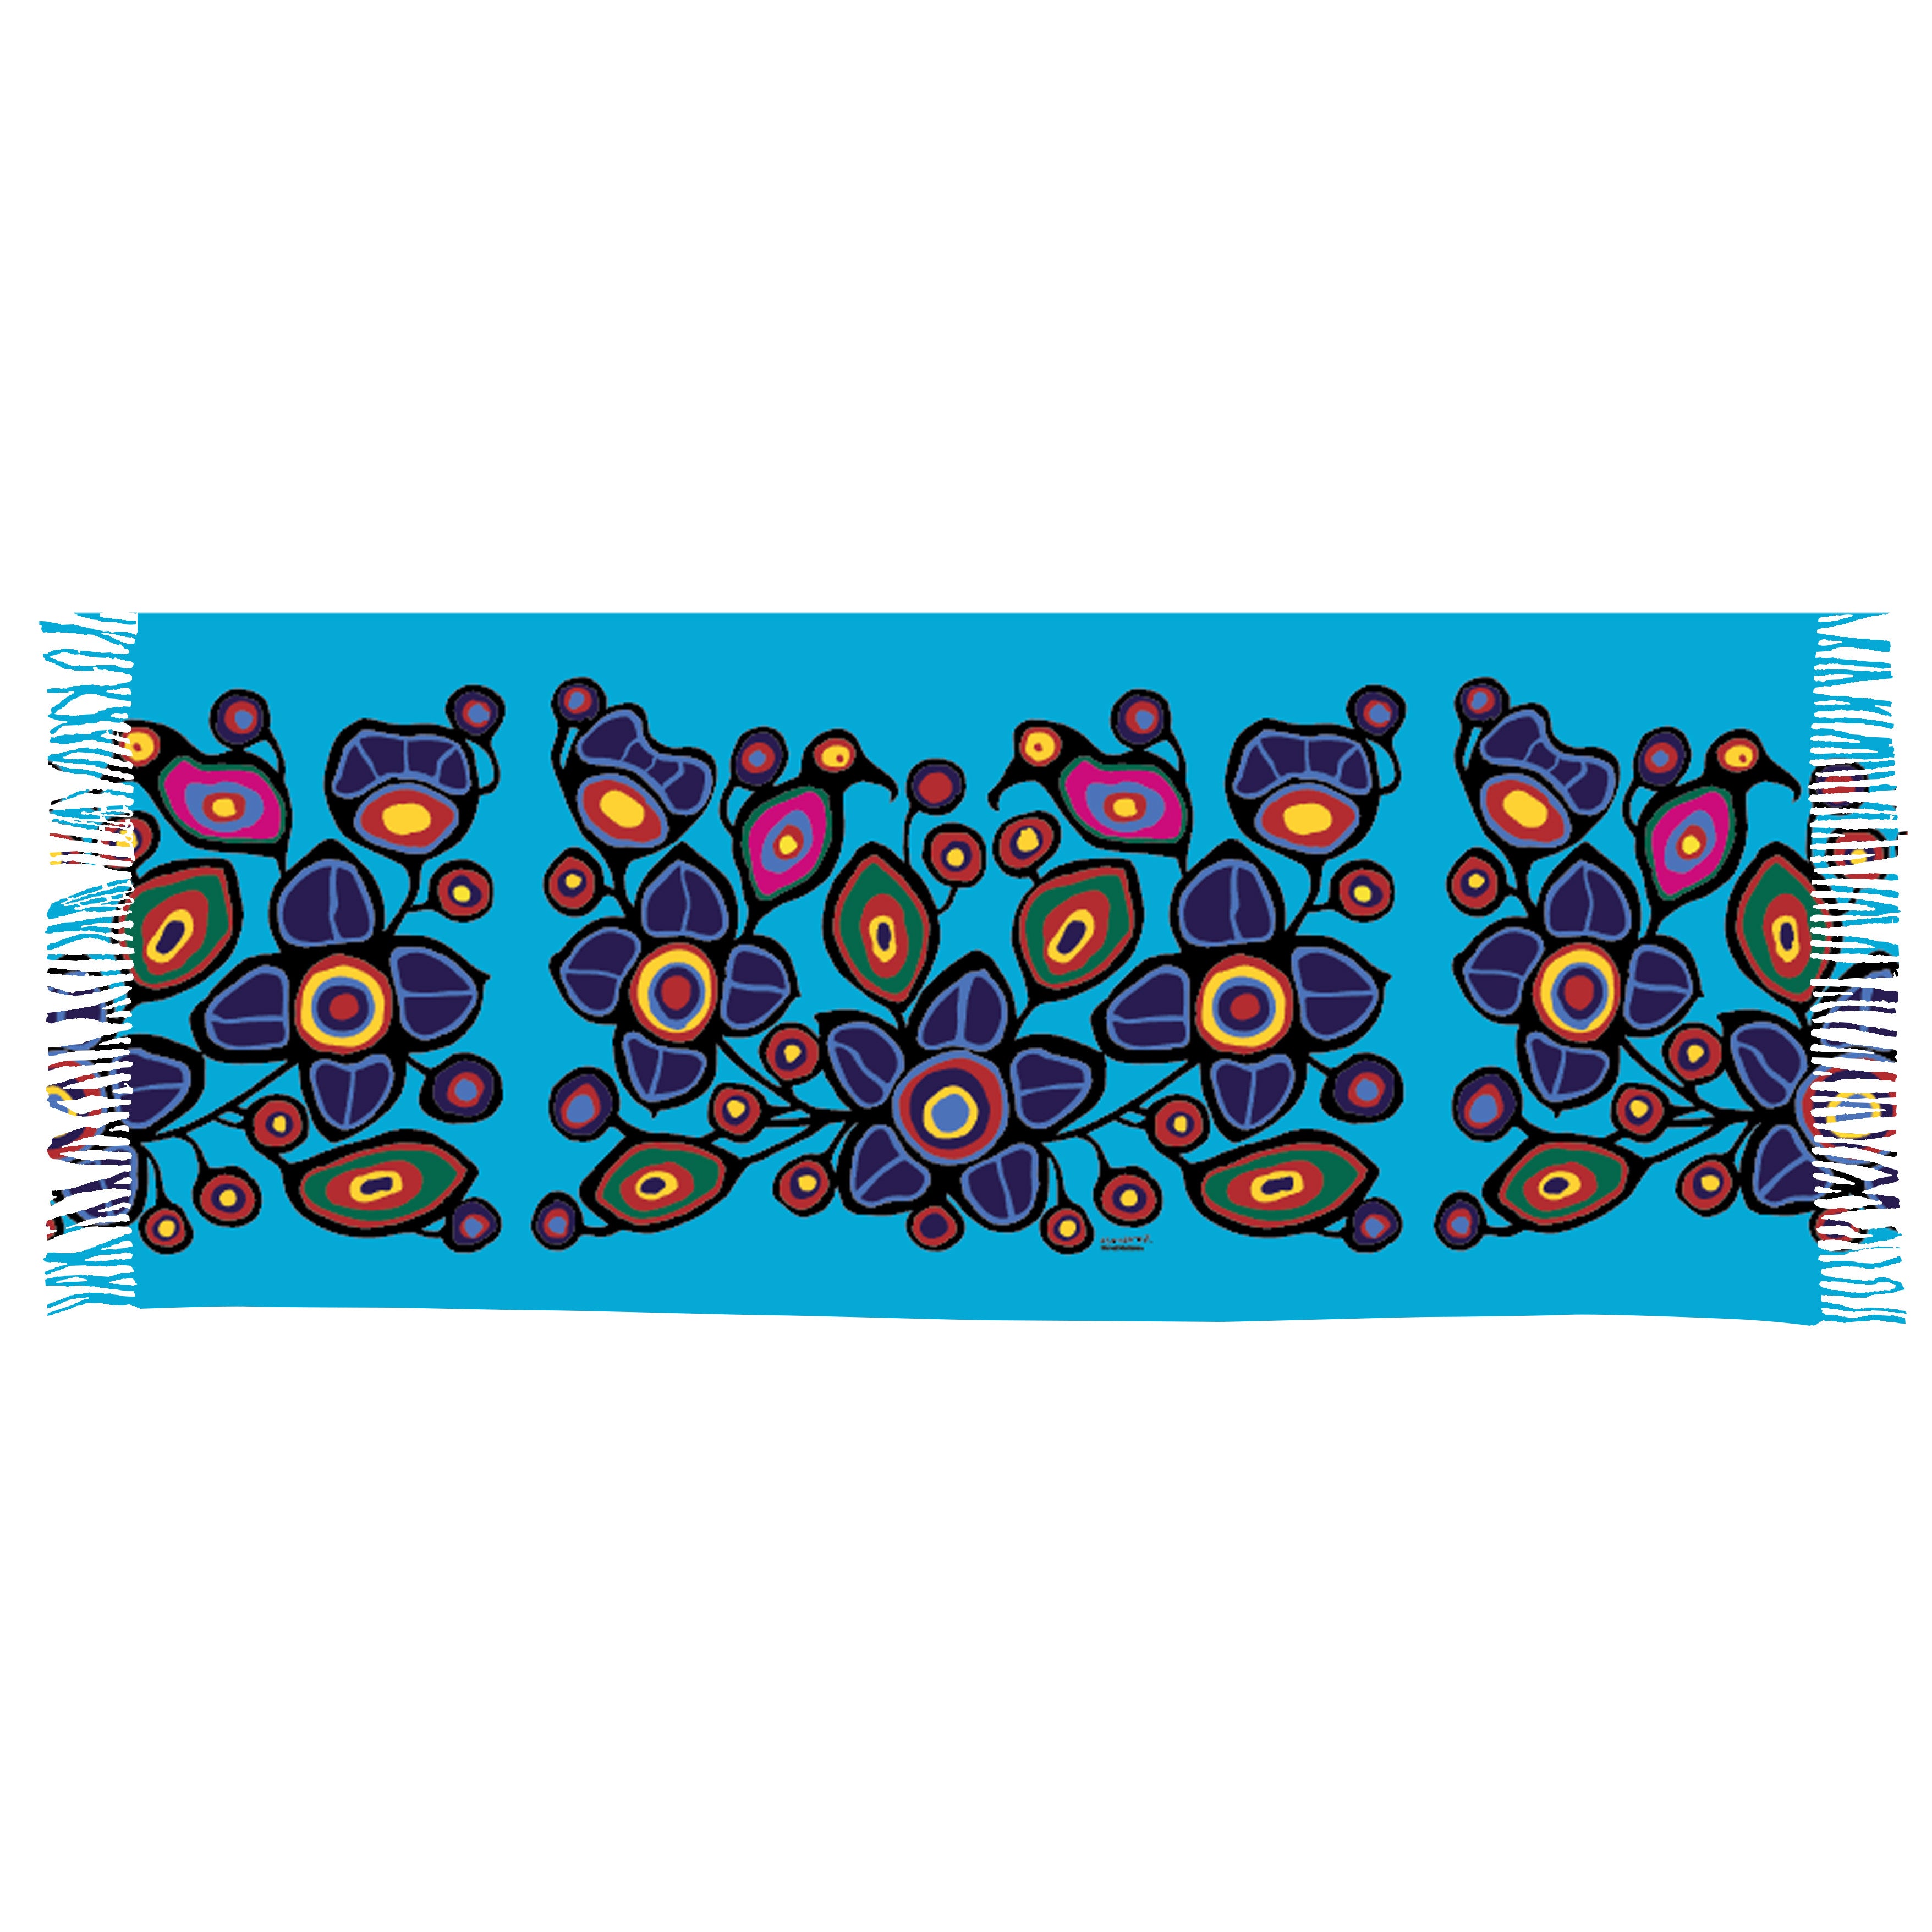 Norval Morrisseau Flowers and Birds Eco-Shawl